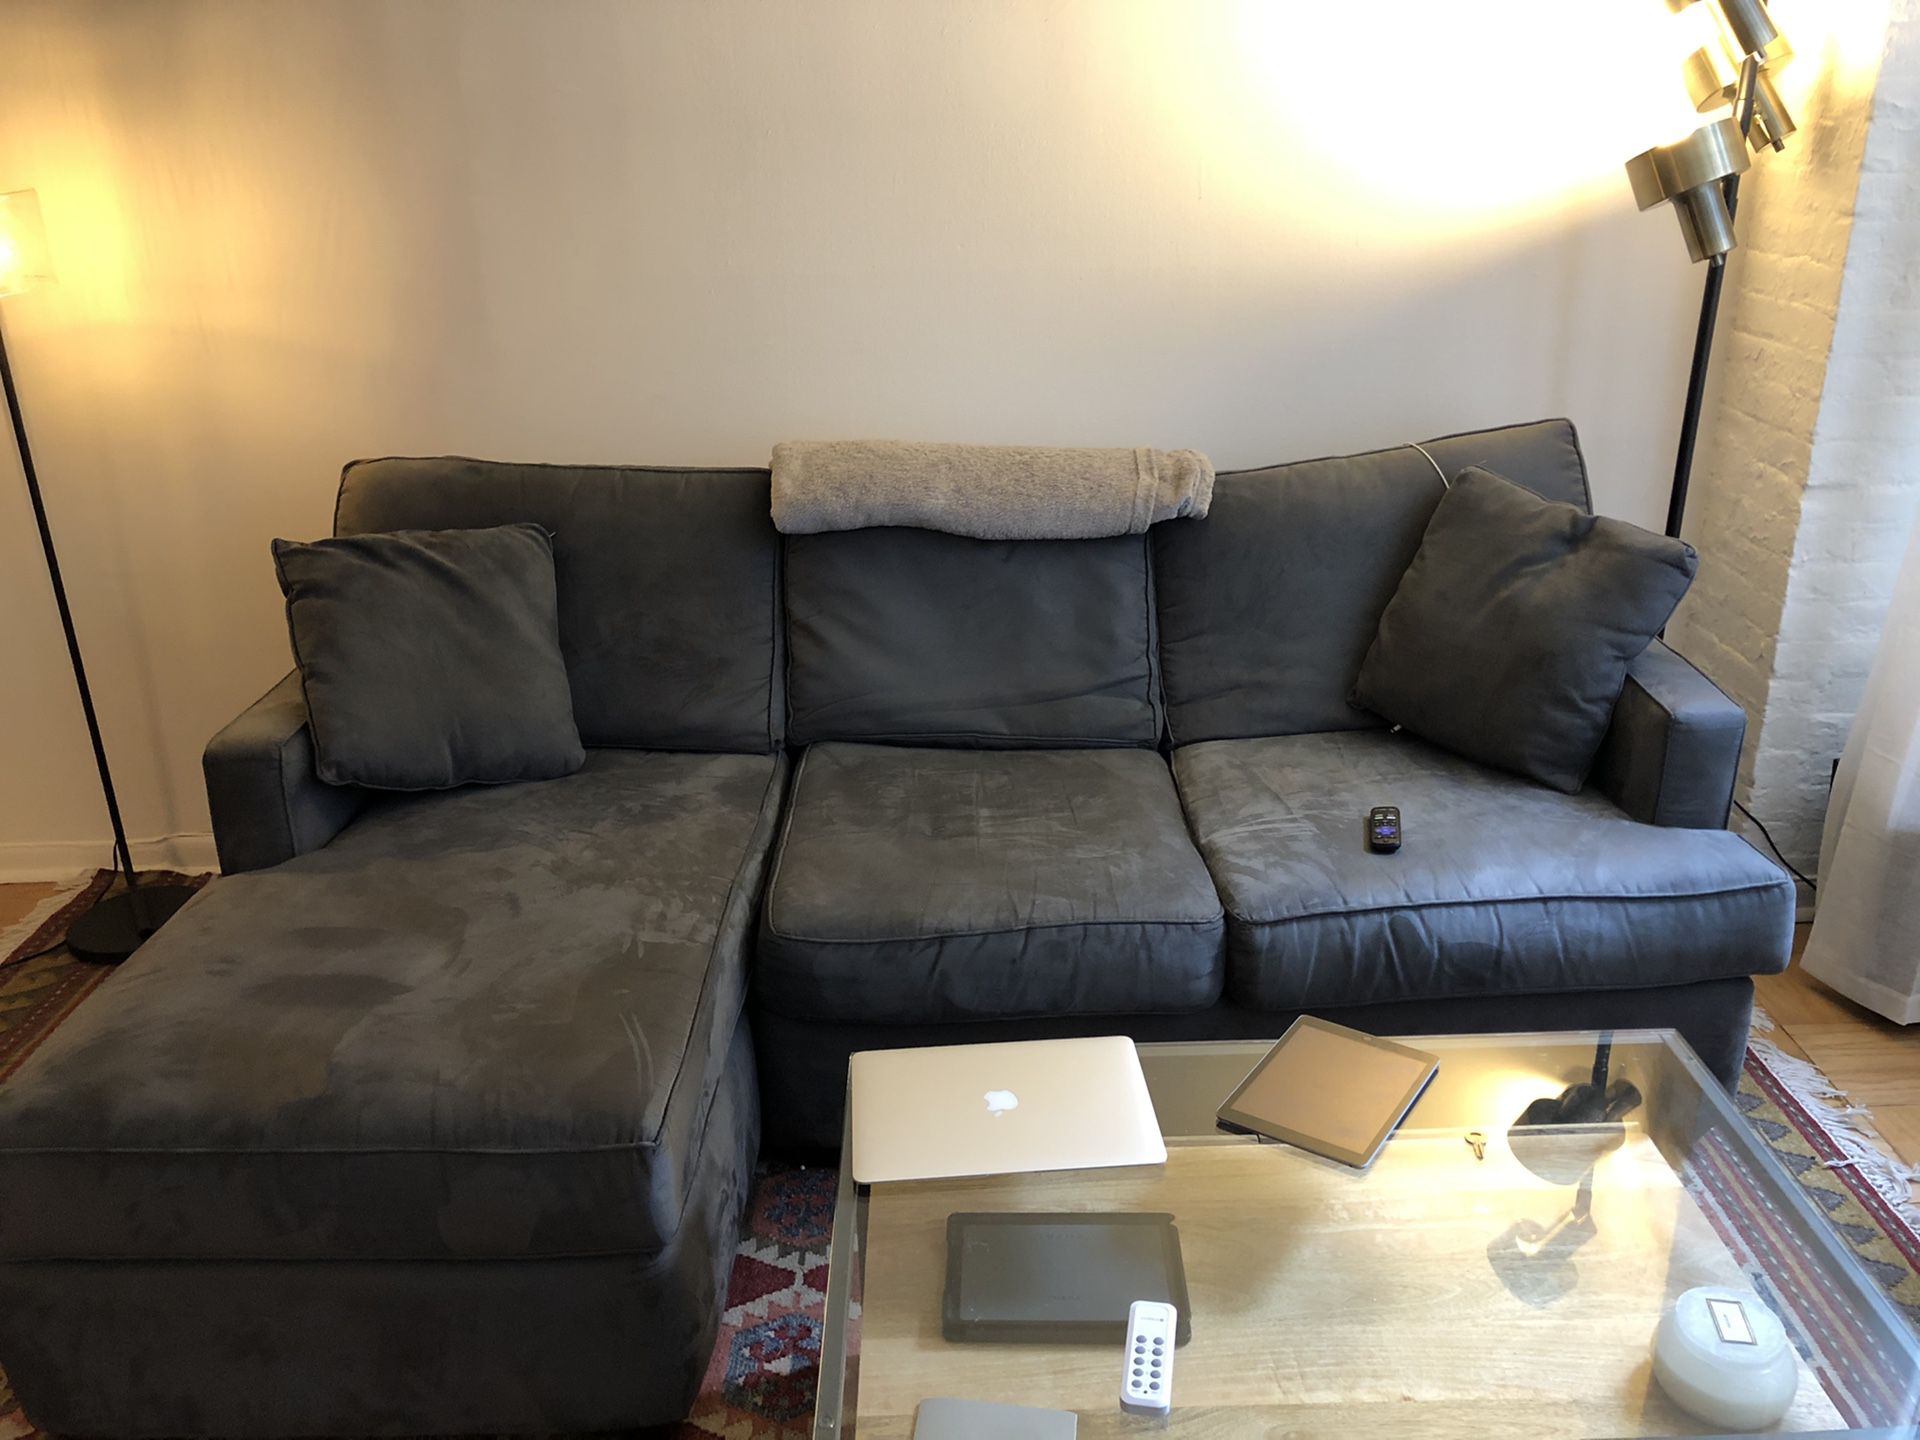 Slate grey sectional couch